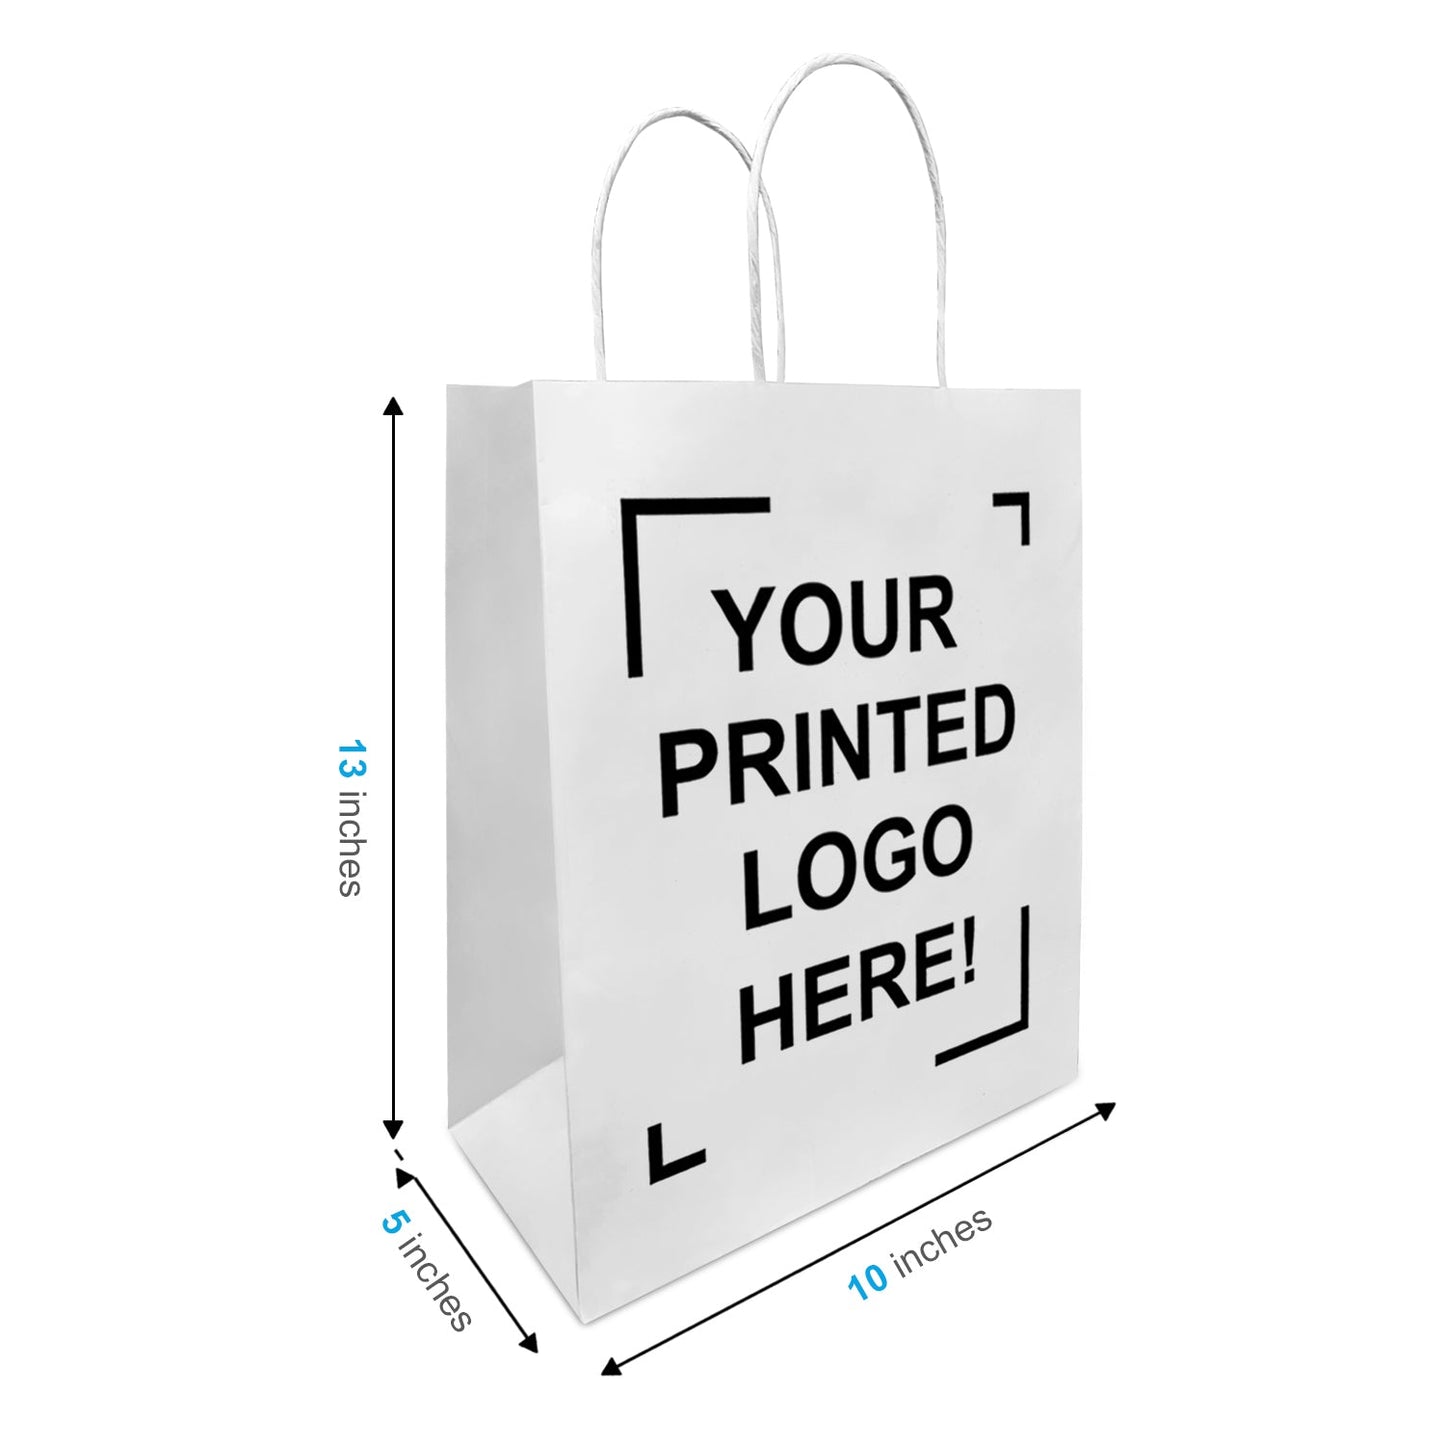 250 Pcs, Debbie, 10x5x13 inches, White Paper Bags, with Twisted Handle, Full Color Custom Print